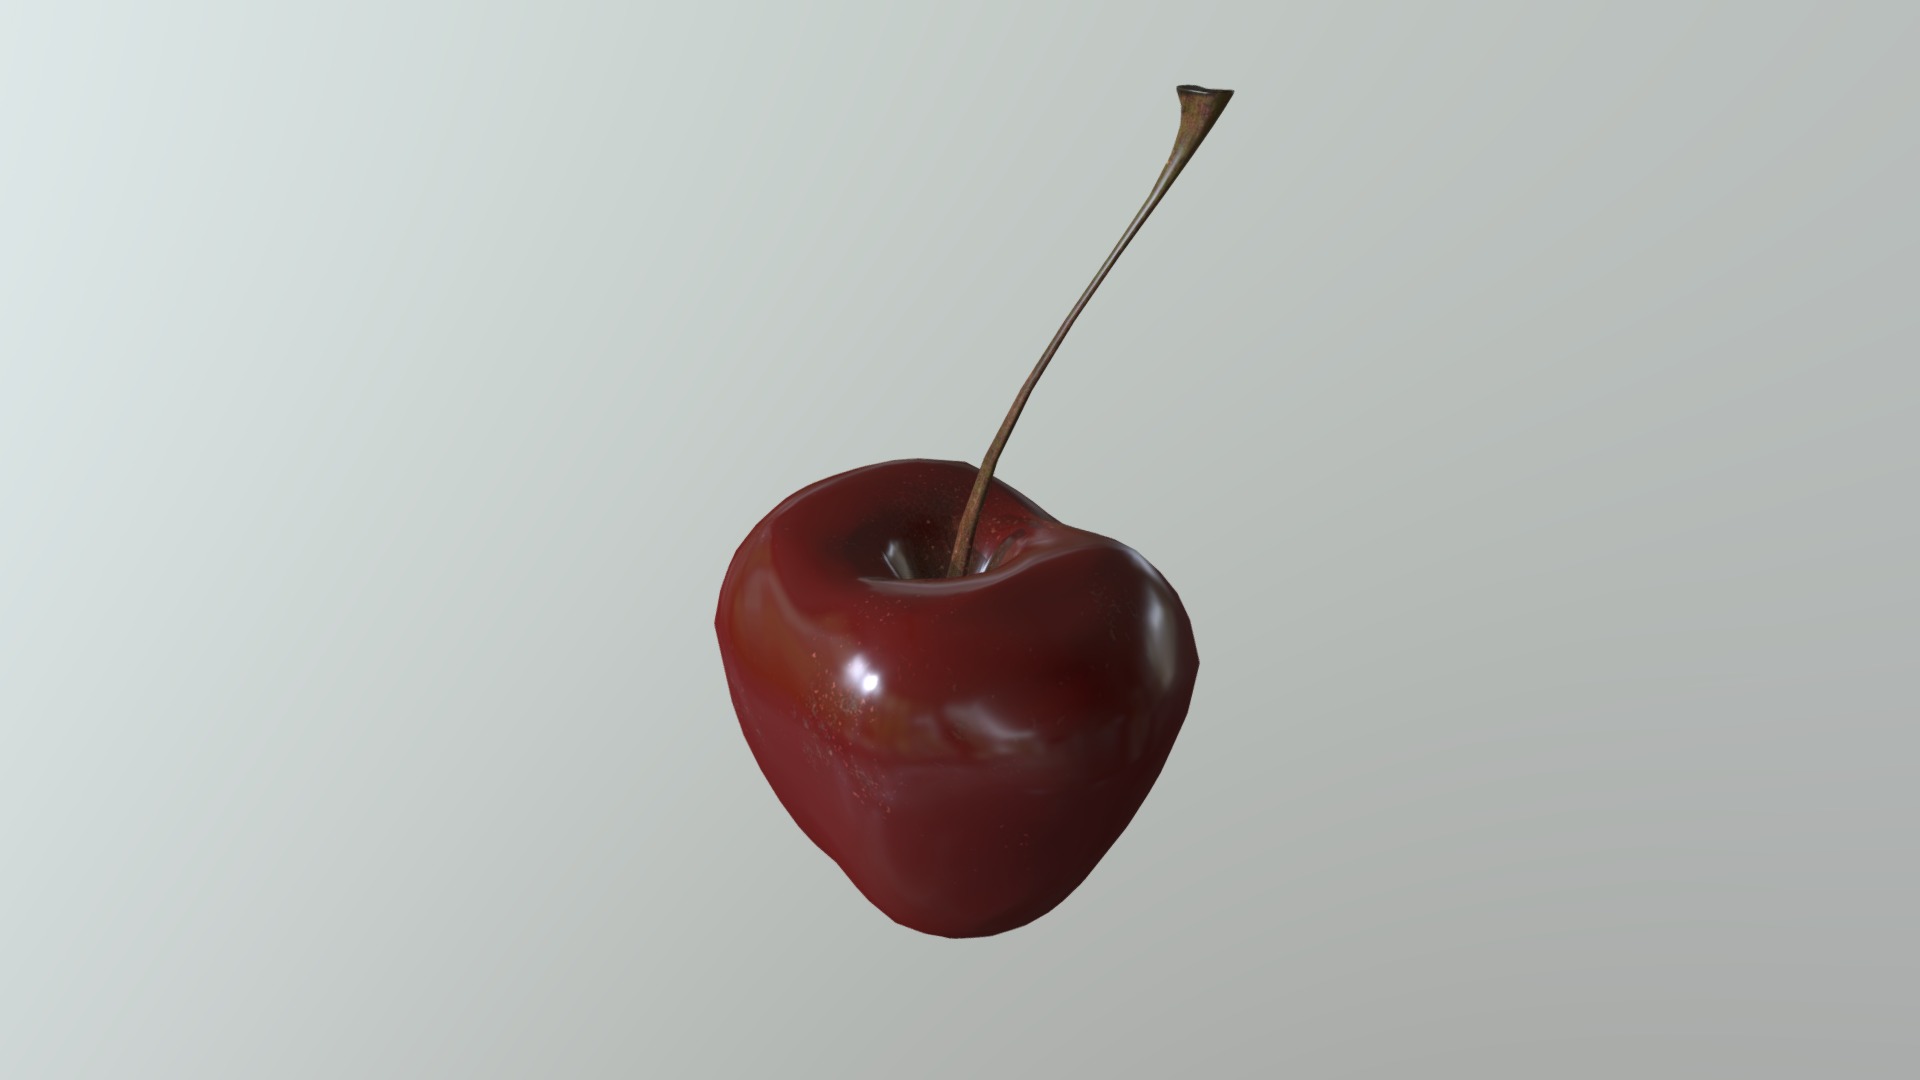 3D model Cherry - This is a 3D model of the Cherry. The 3D model is about a red apple with a stem.